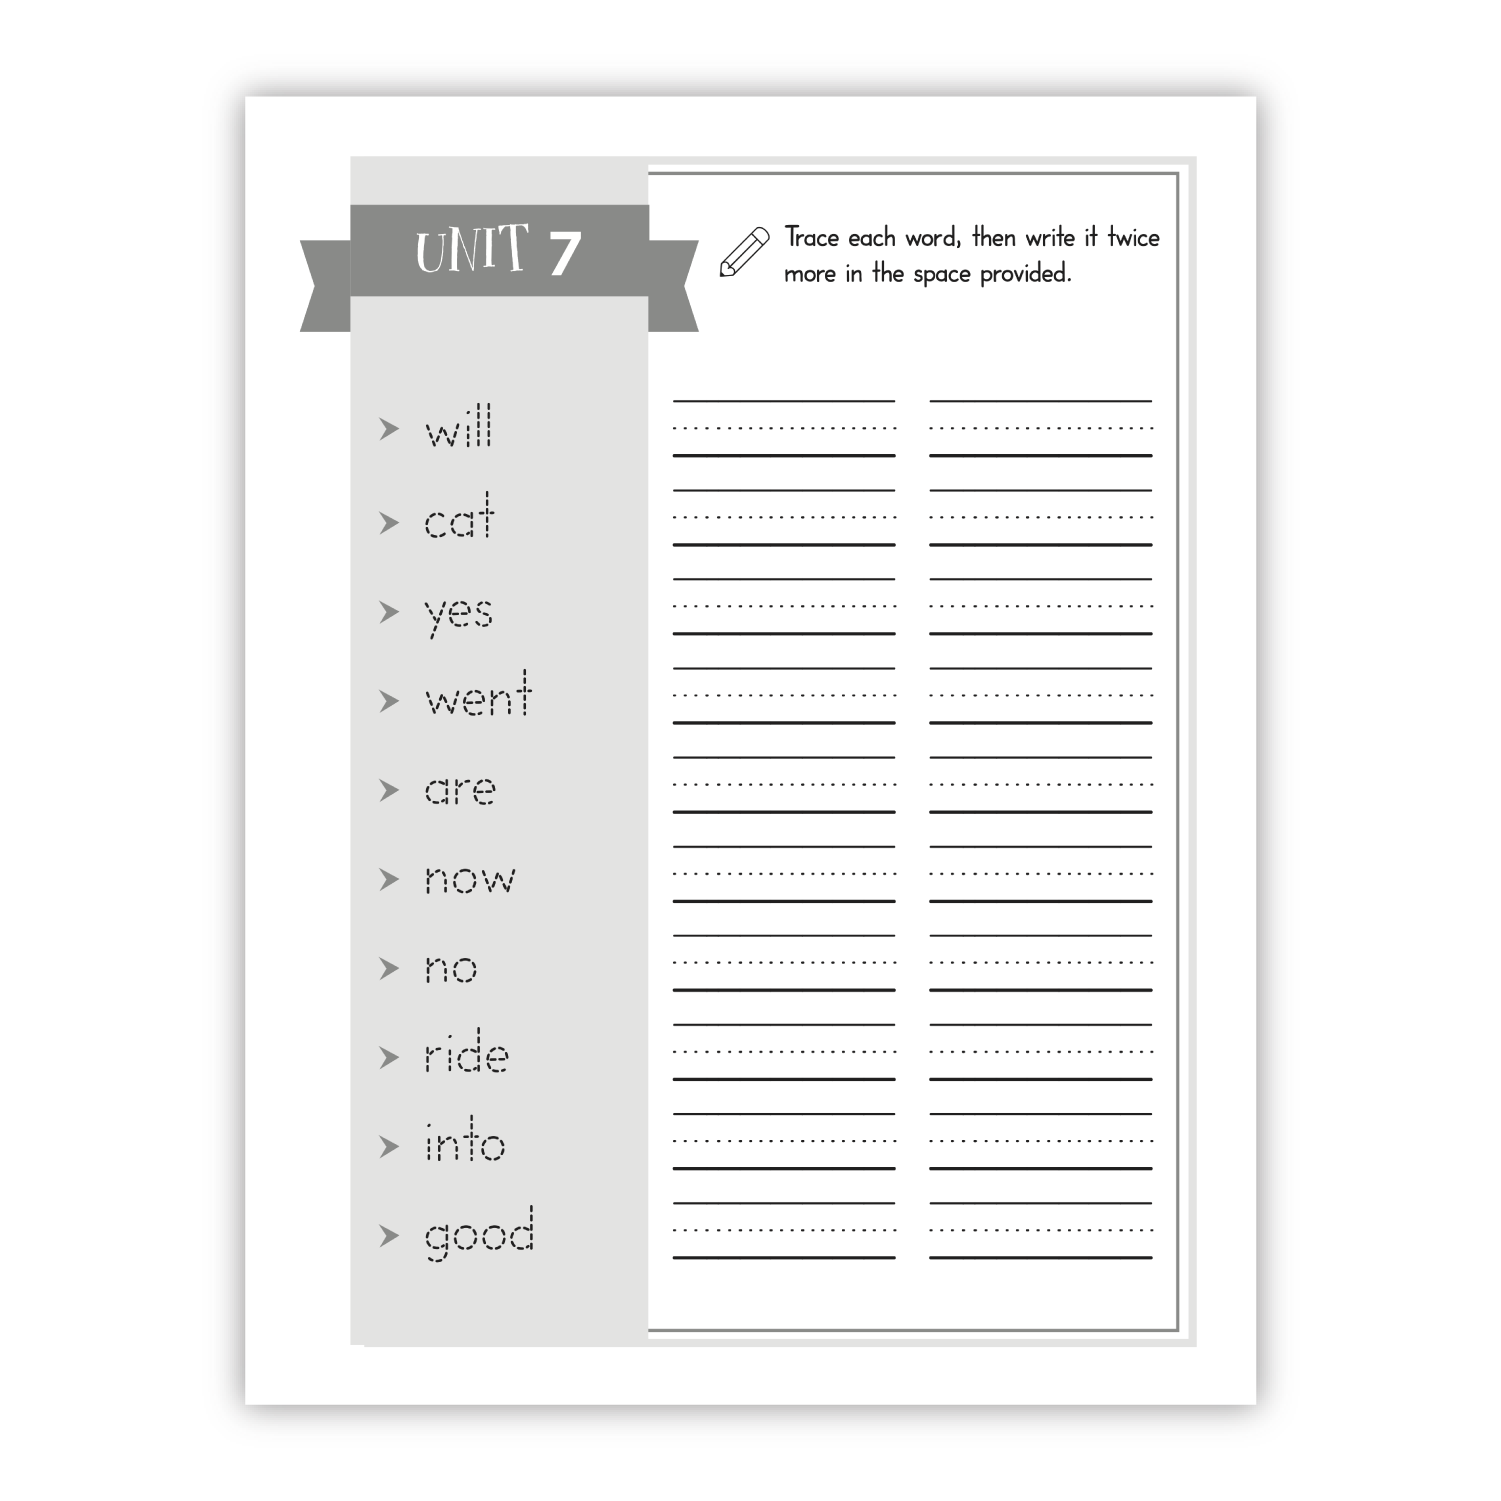 PPP Sight Words Book Mockups-04.png